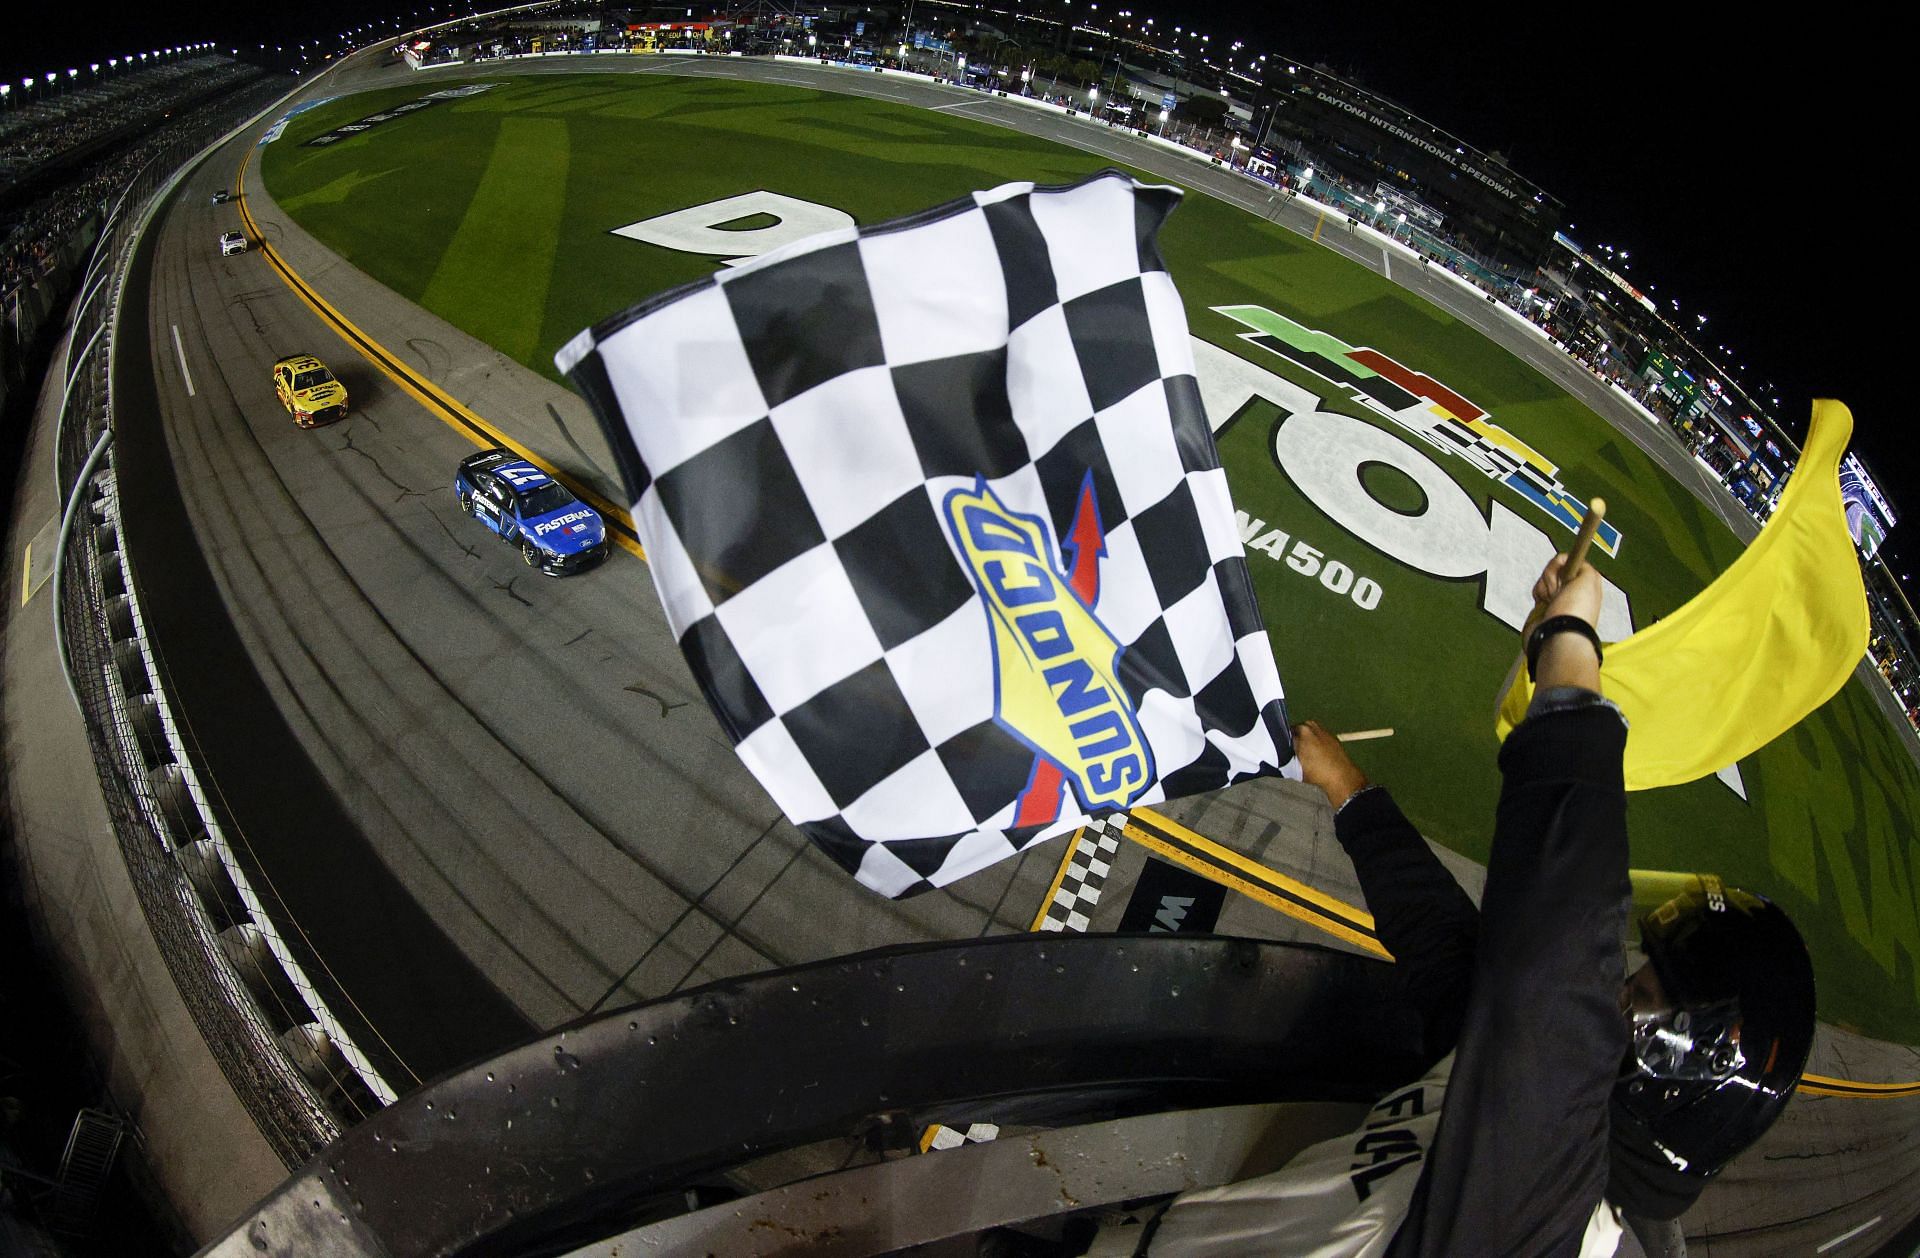 NASCAR Bluegreen Vacations Duel 1 and 2 Timings, where to watch, and more